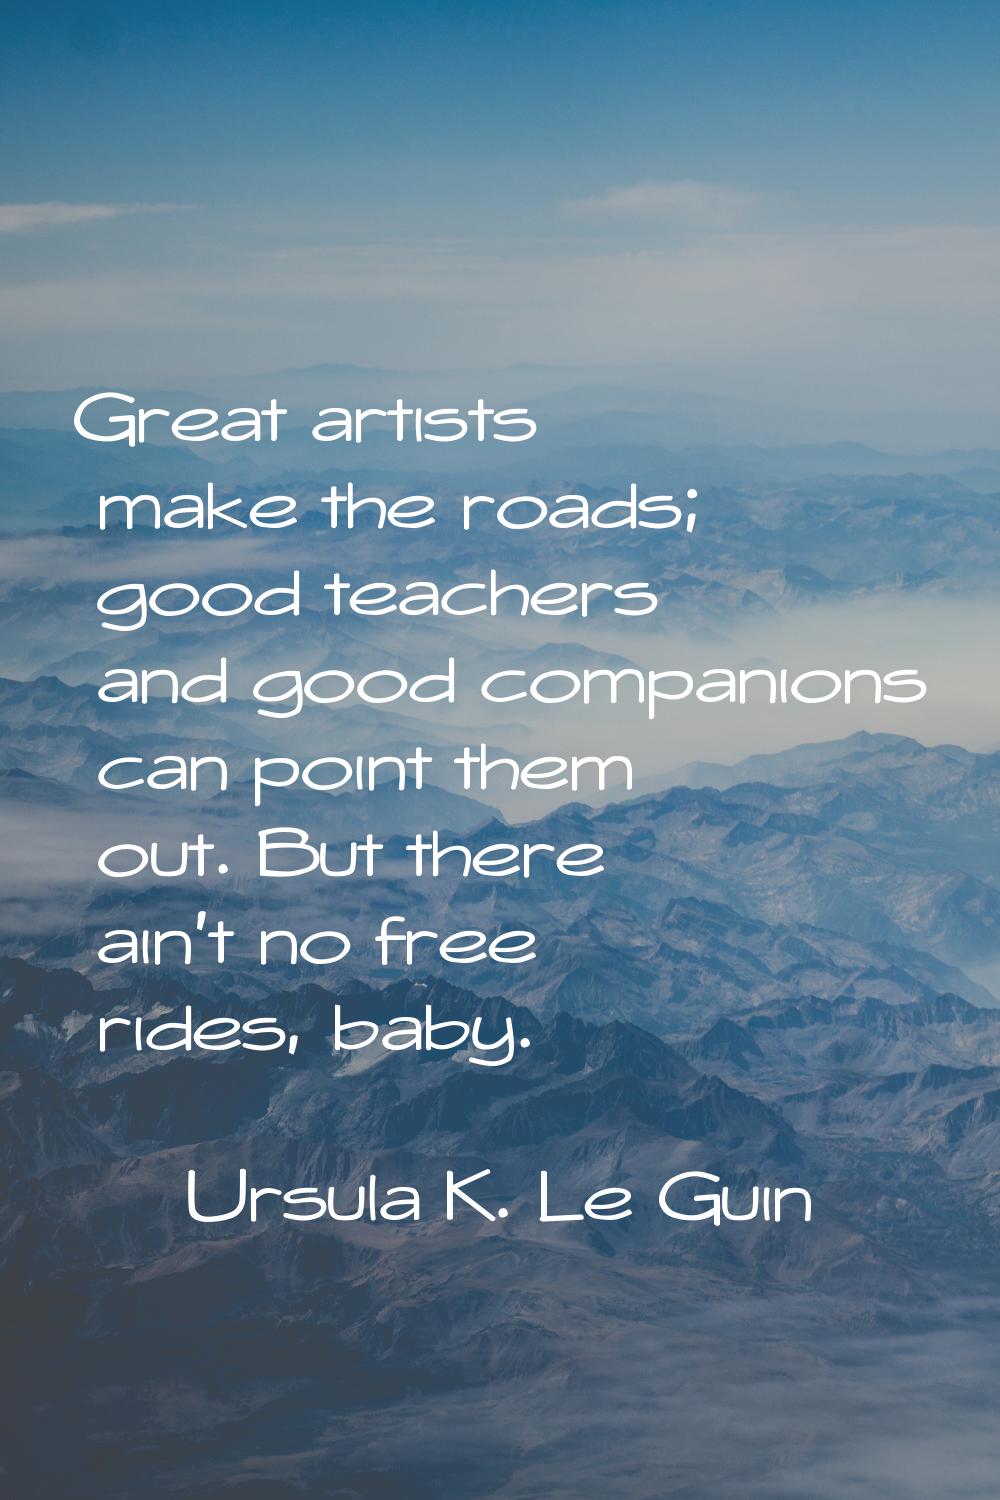 Great artists make the roads; good teachers and good companions can point them out. But there ain't